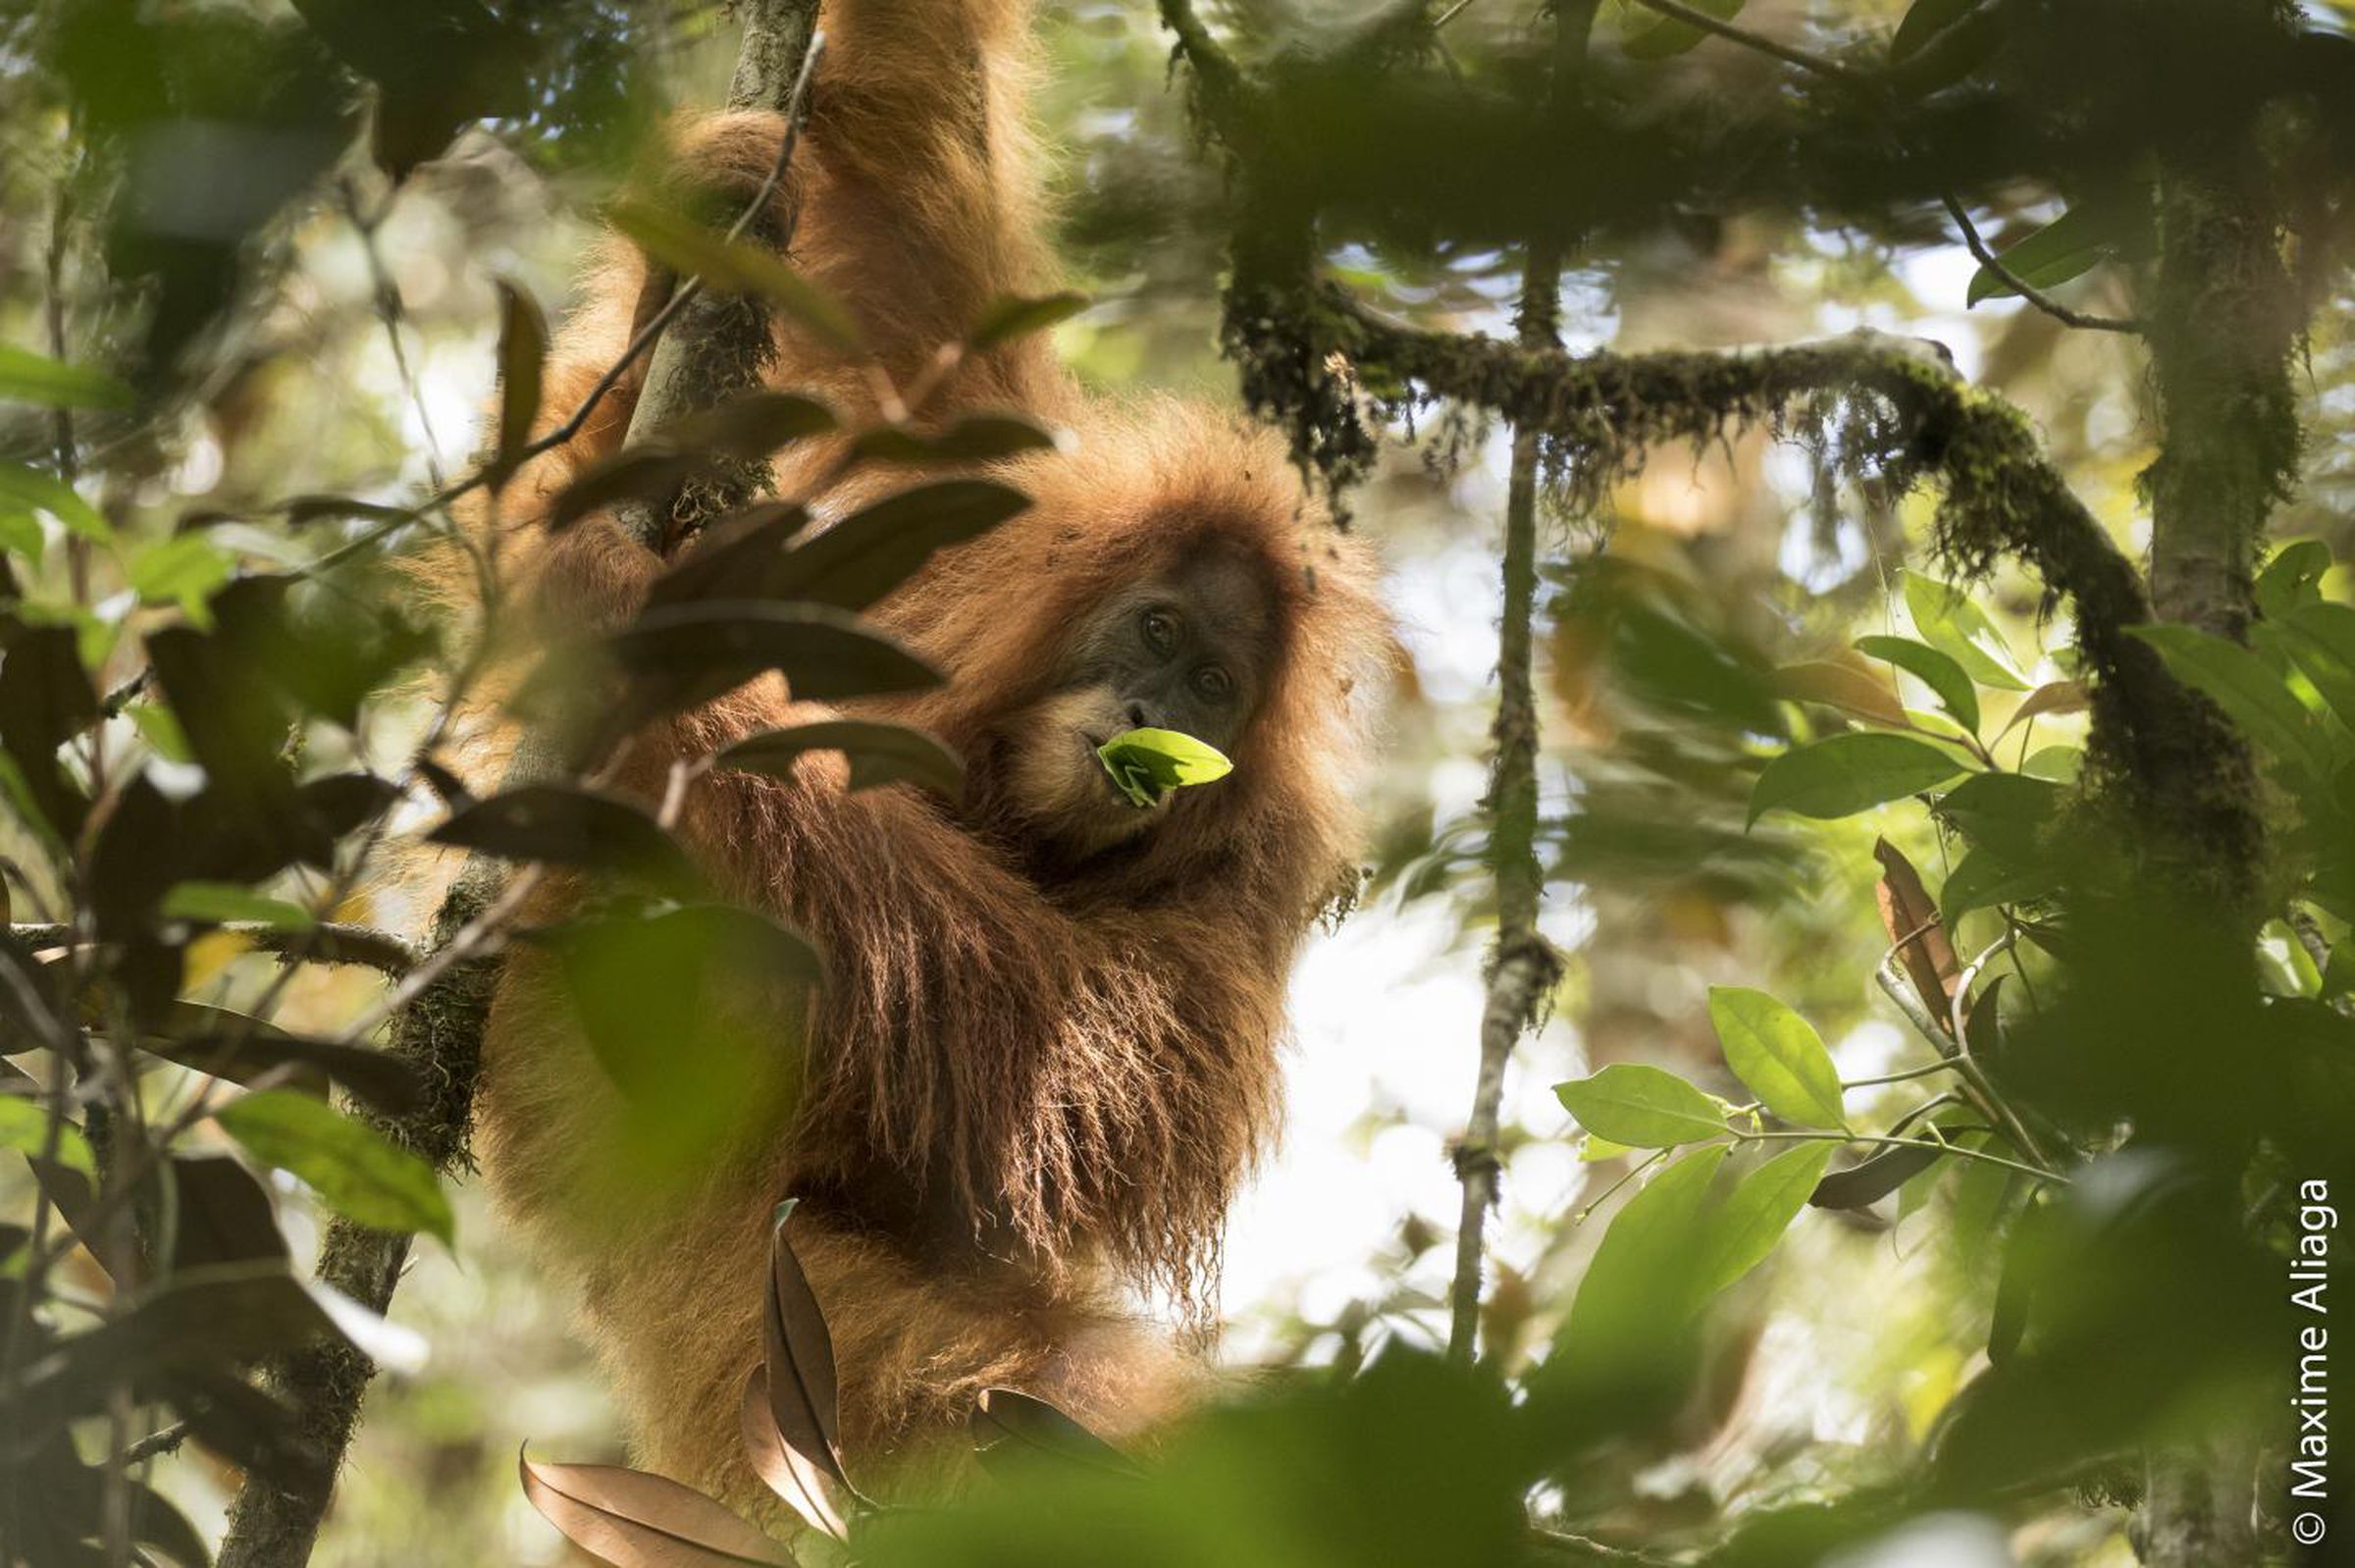 The Pongo tapanuliensis is the rarest great ape on Earth.